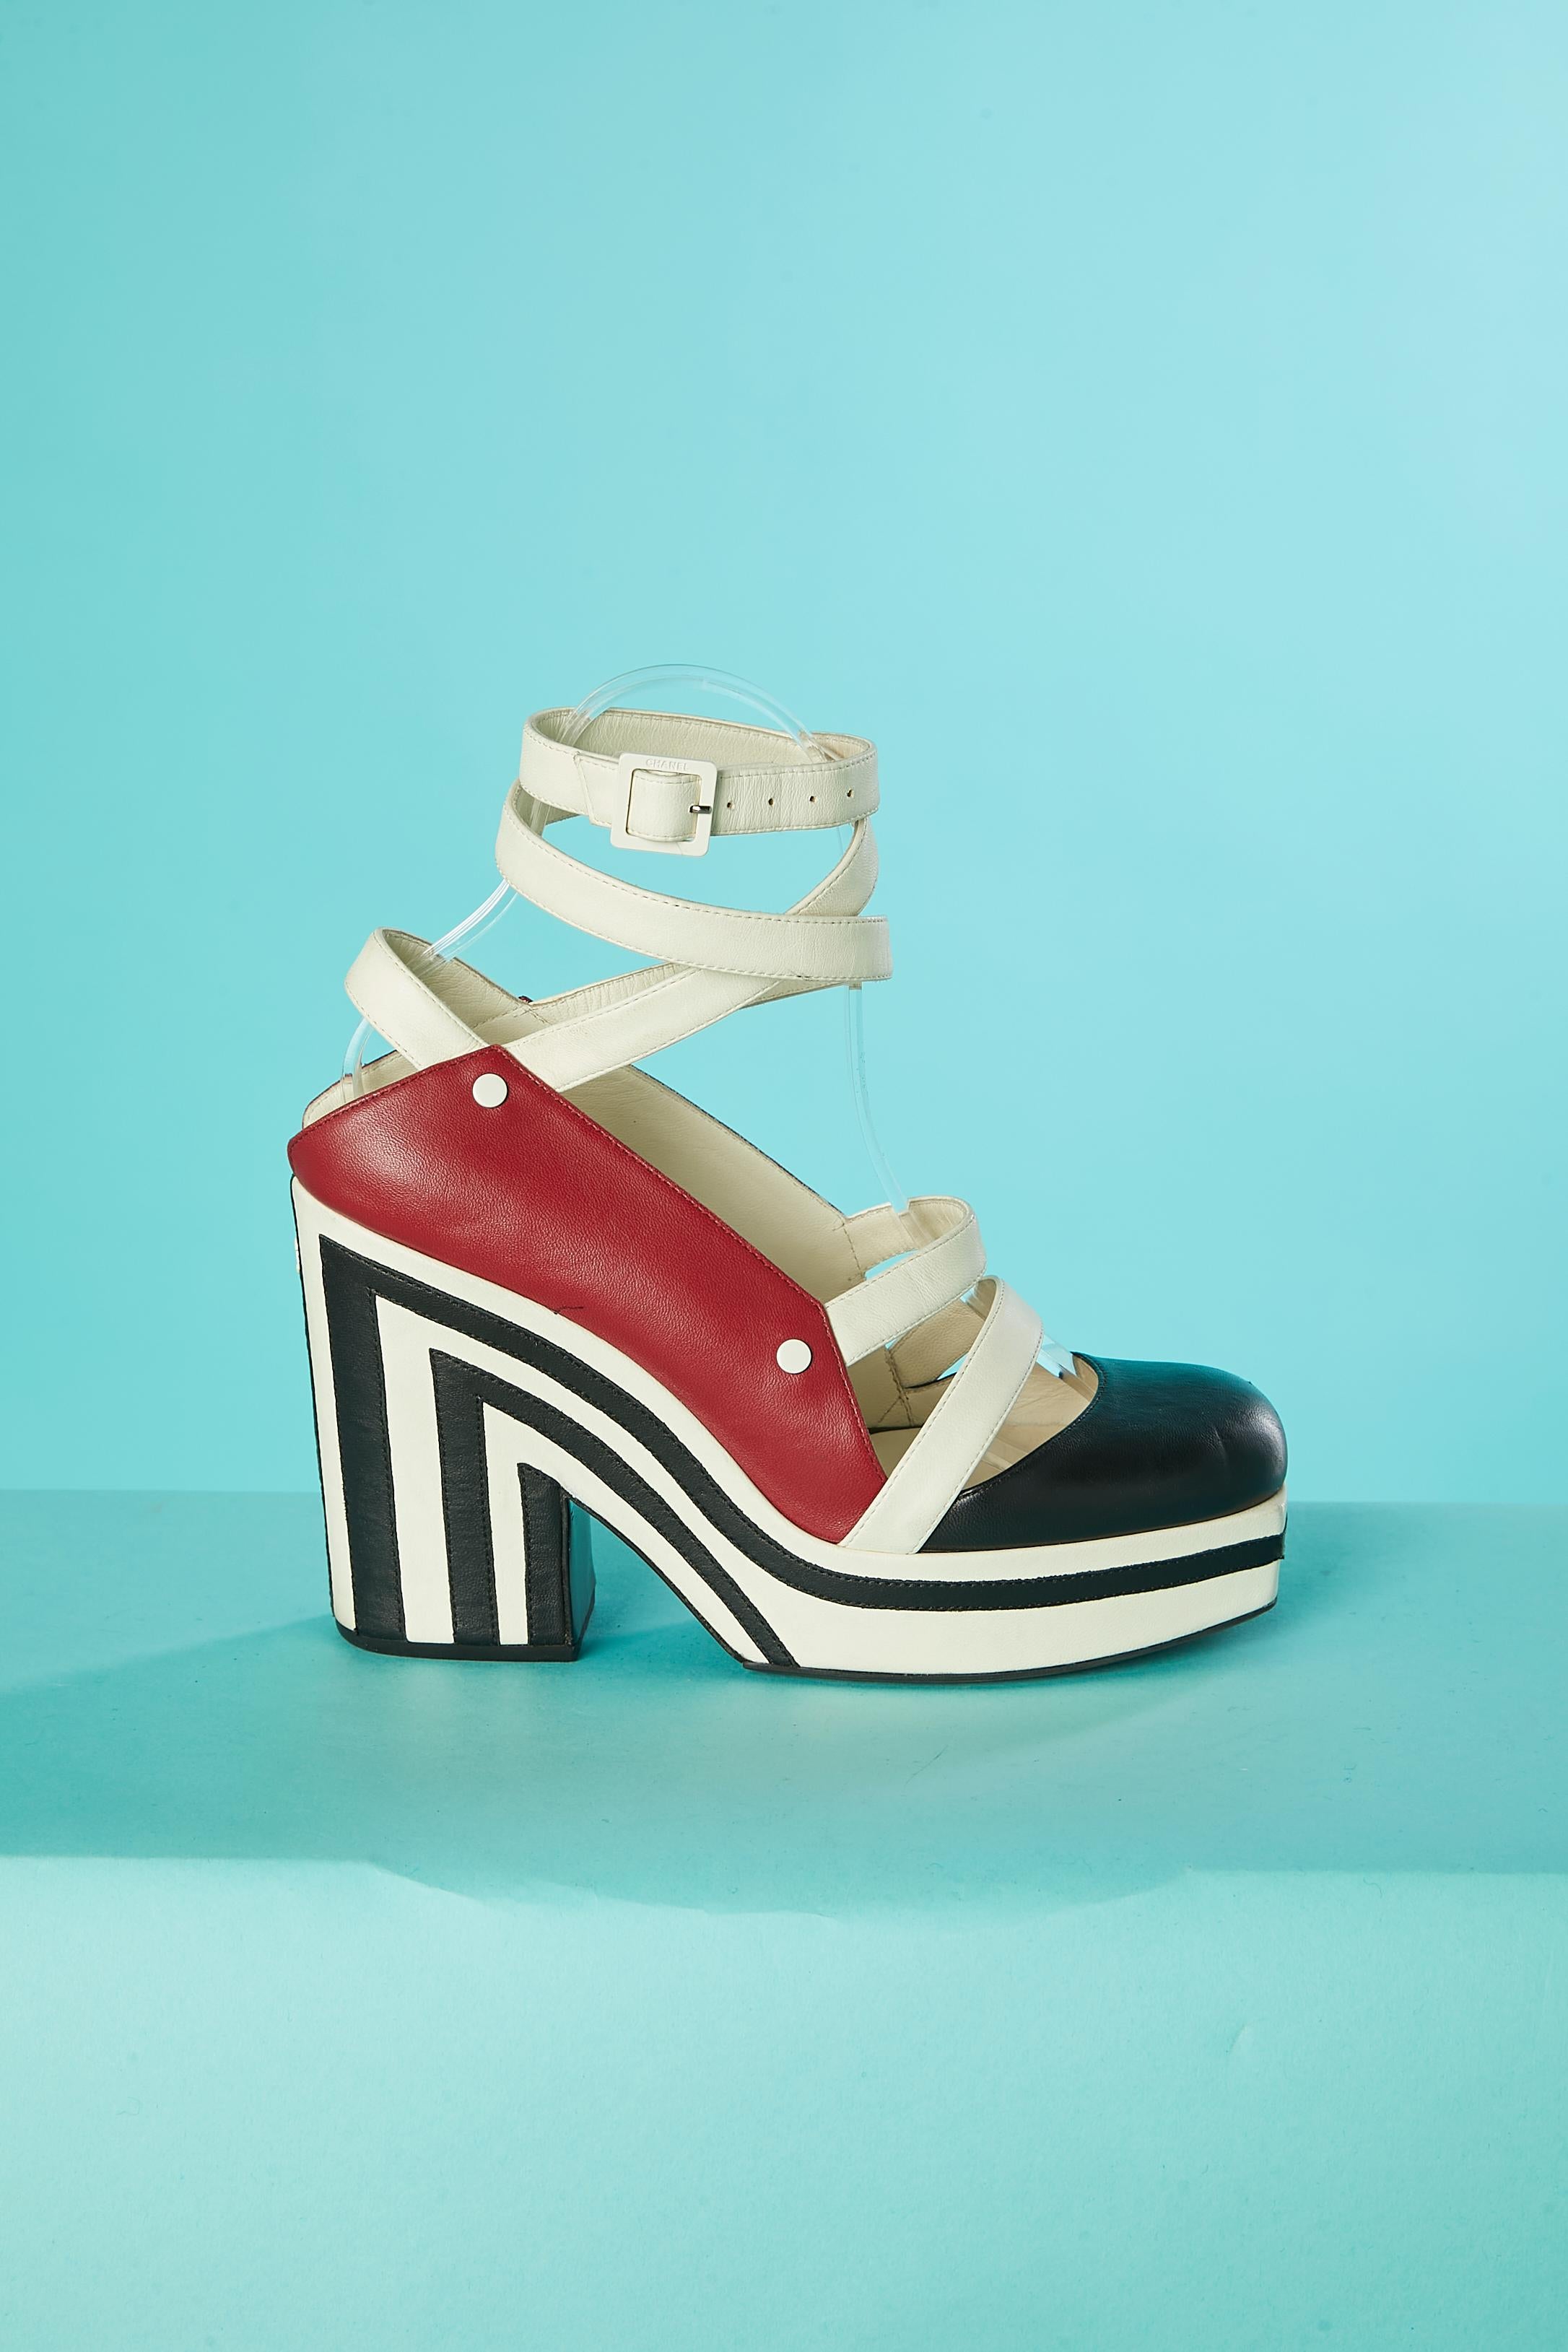 Graphic platform sandals with white leather ankle straps and buckle closure.
Heel height : 10 cm 
Platform : 3 cm
SHOE SIZE : 36